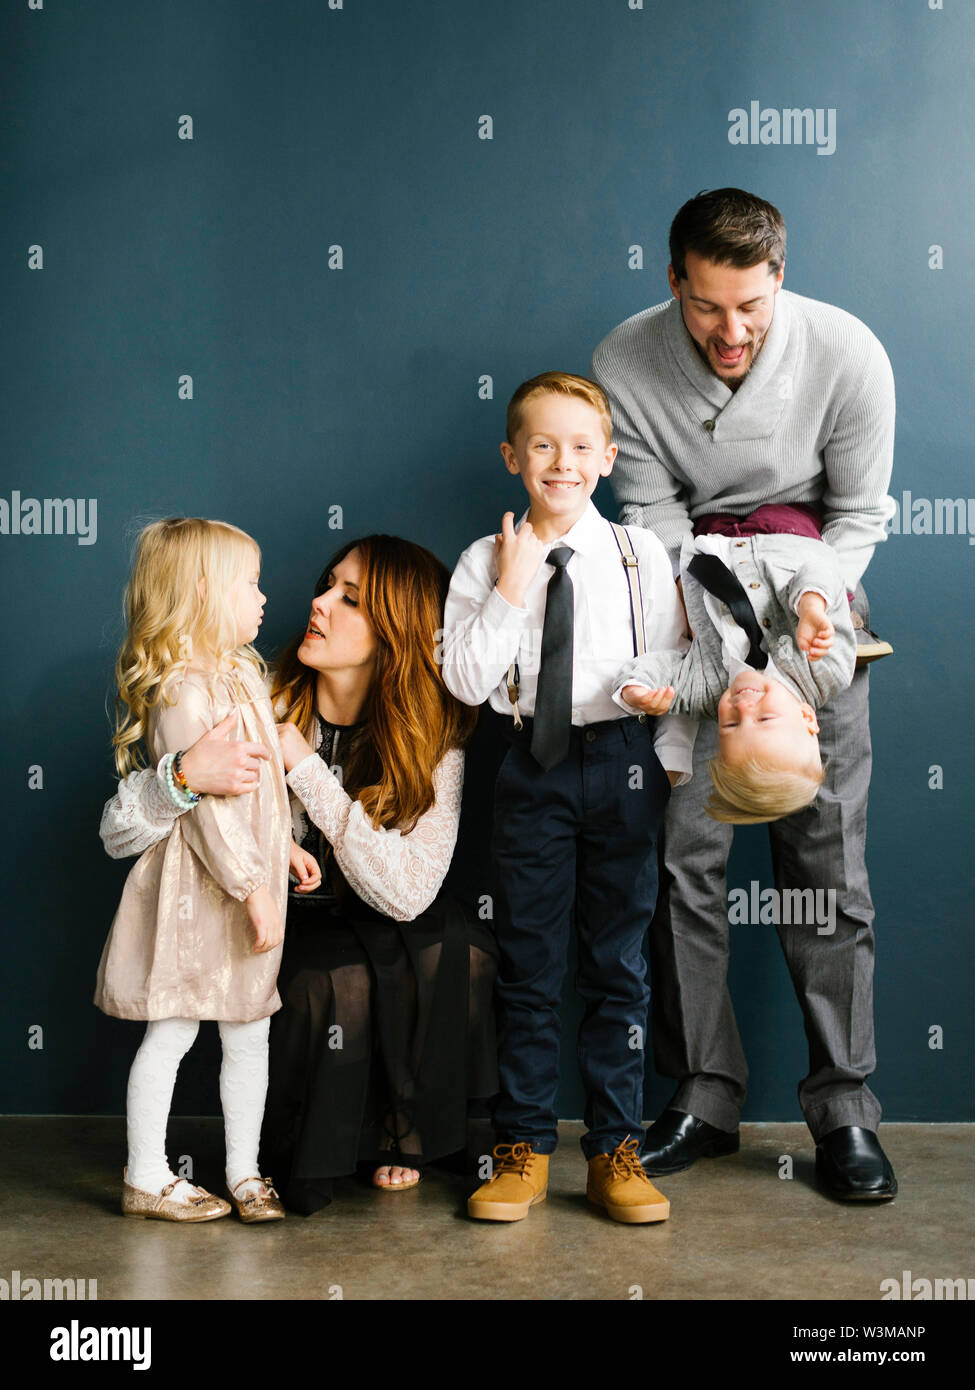 Well-dressed family with three children Stock Photo